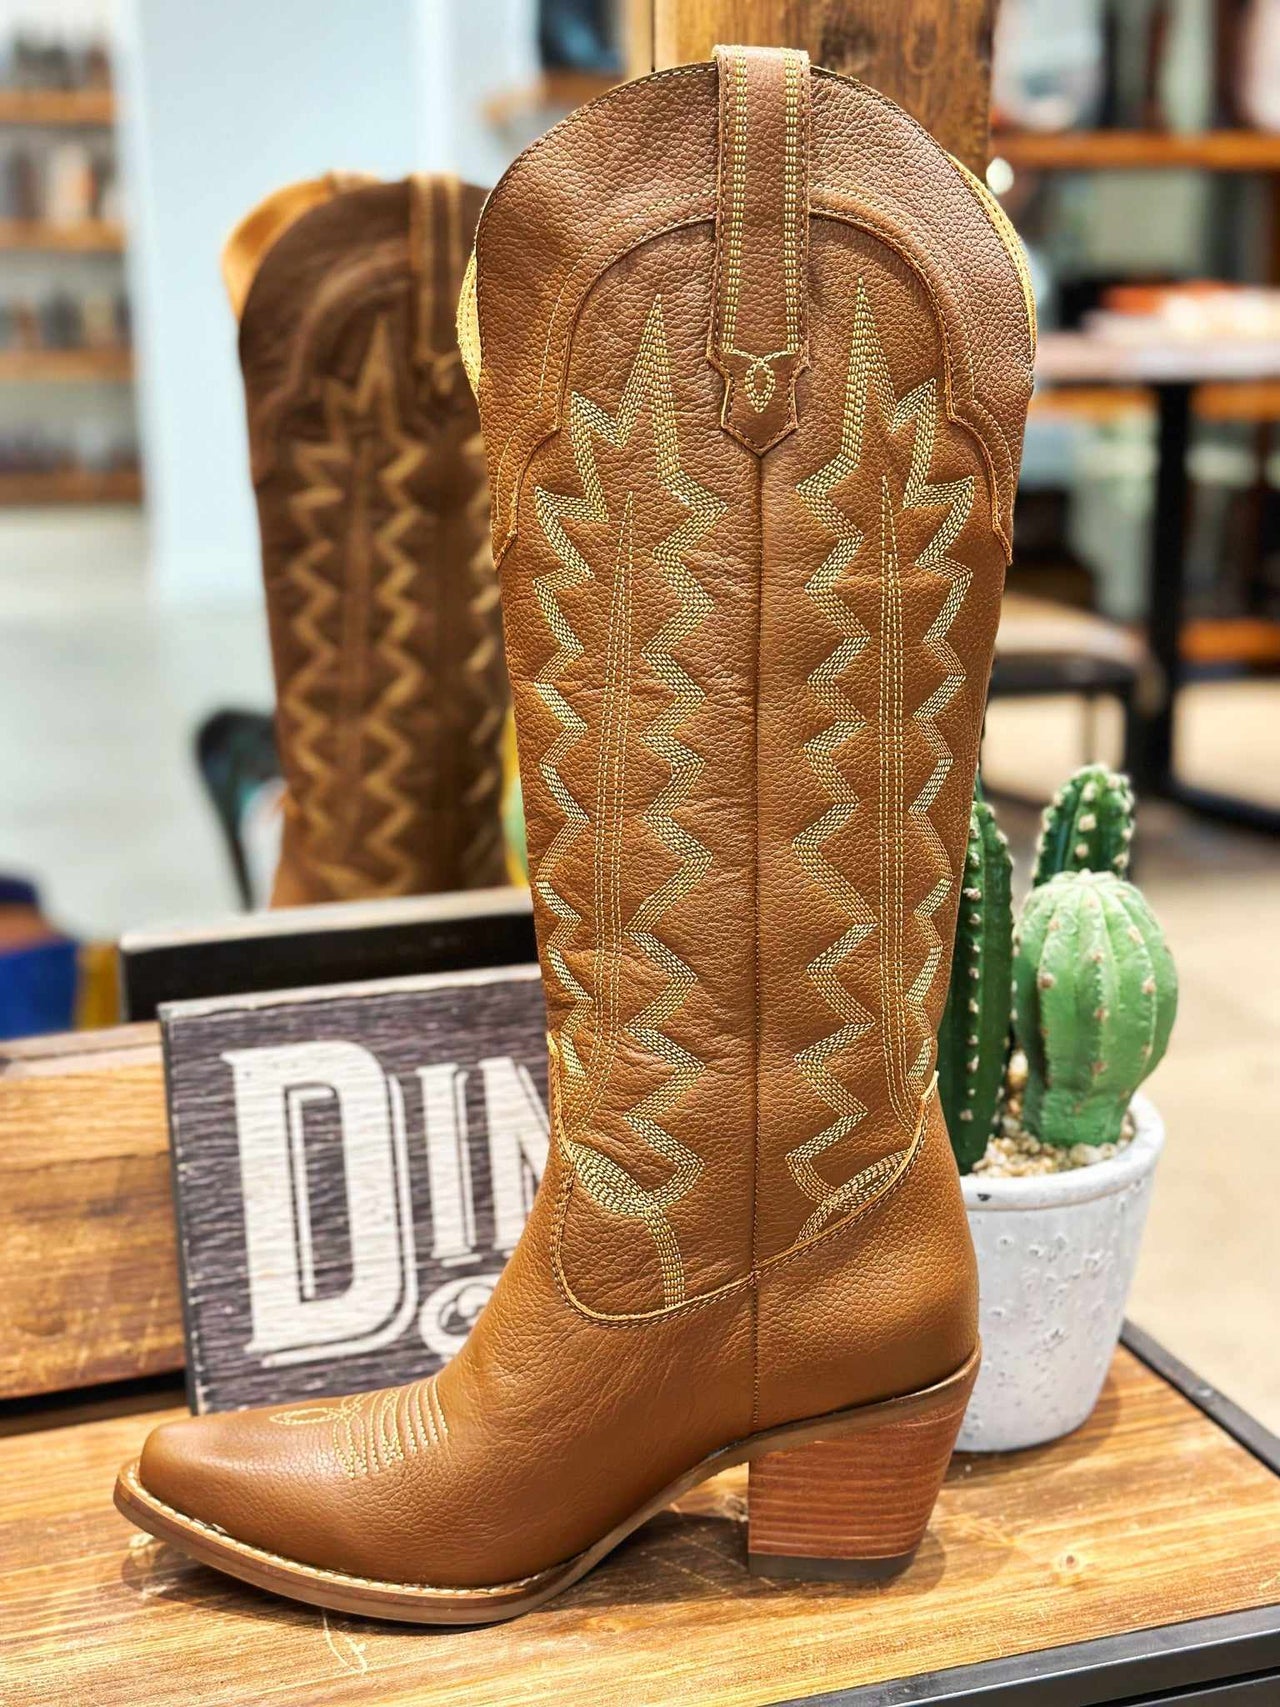 High Cotton Boot by Dingo from Dan Post - Brown